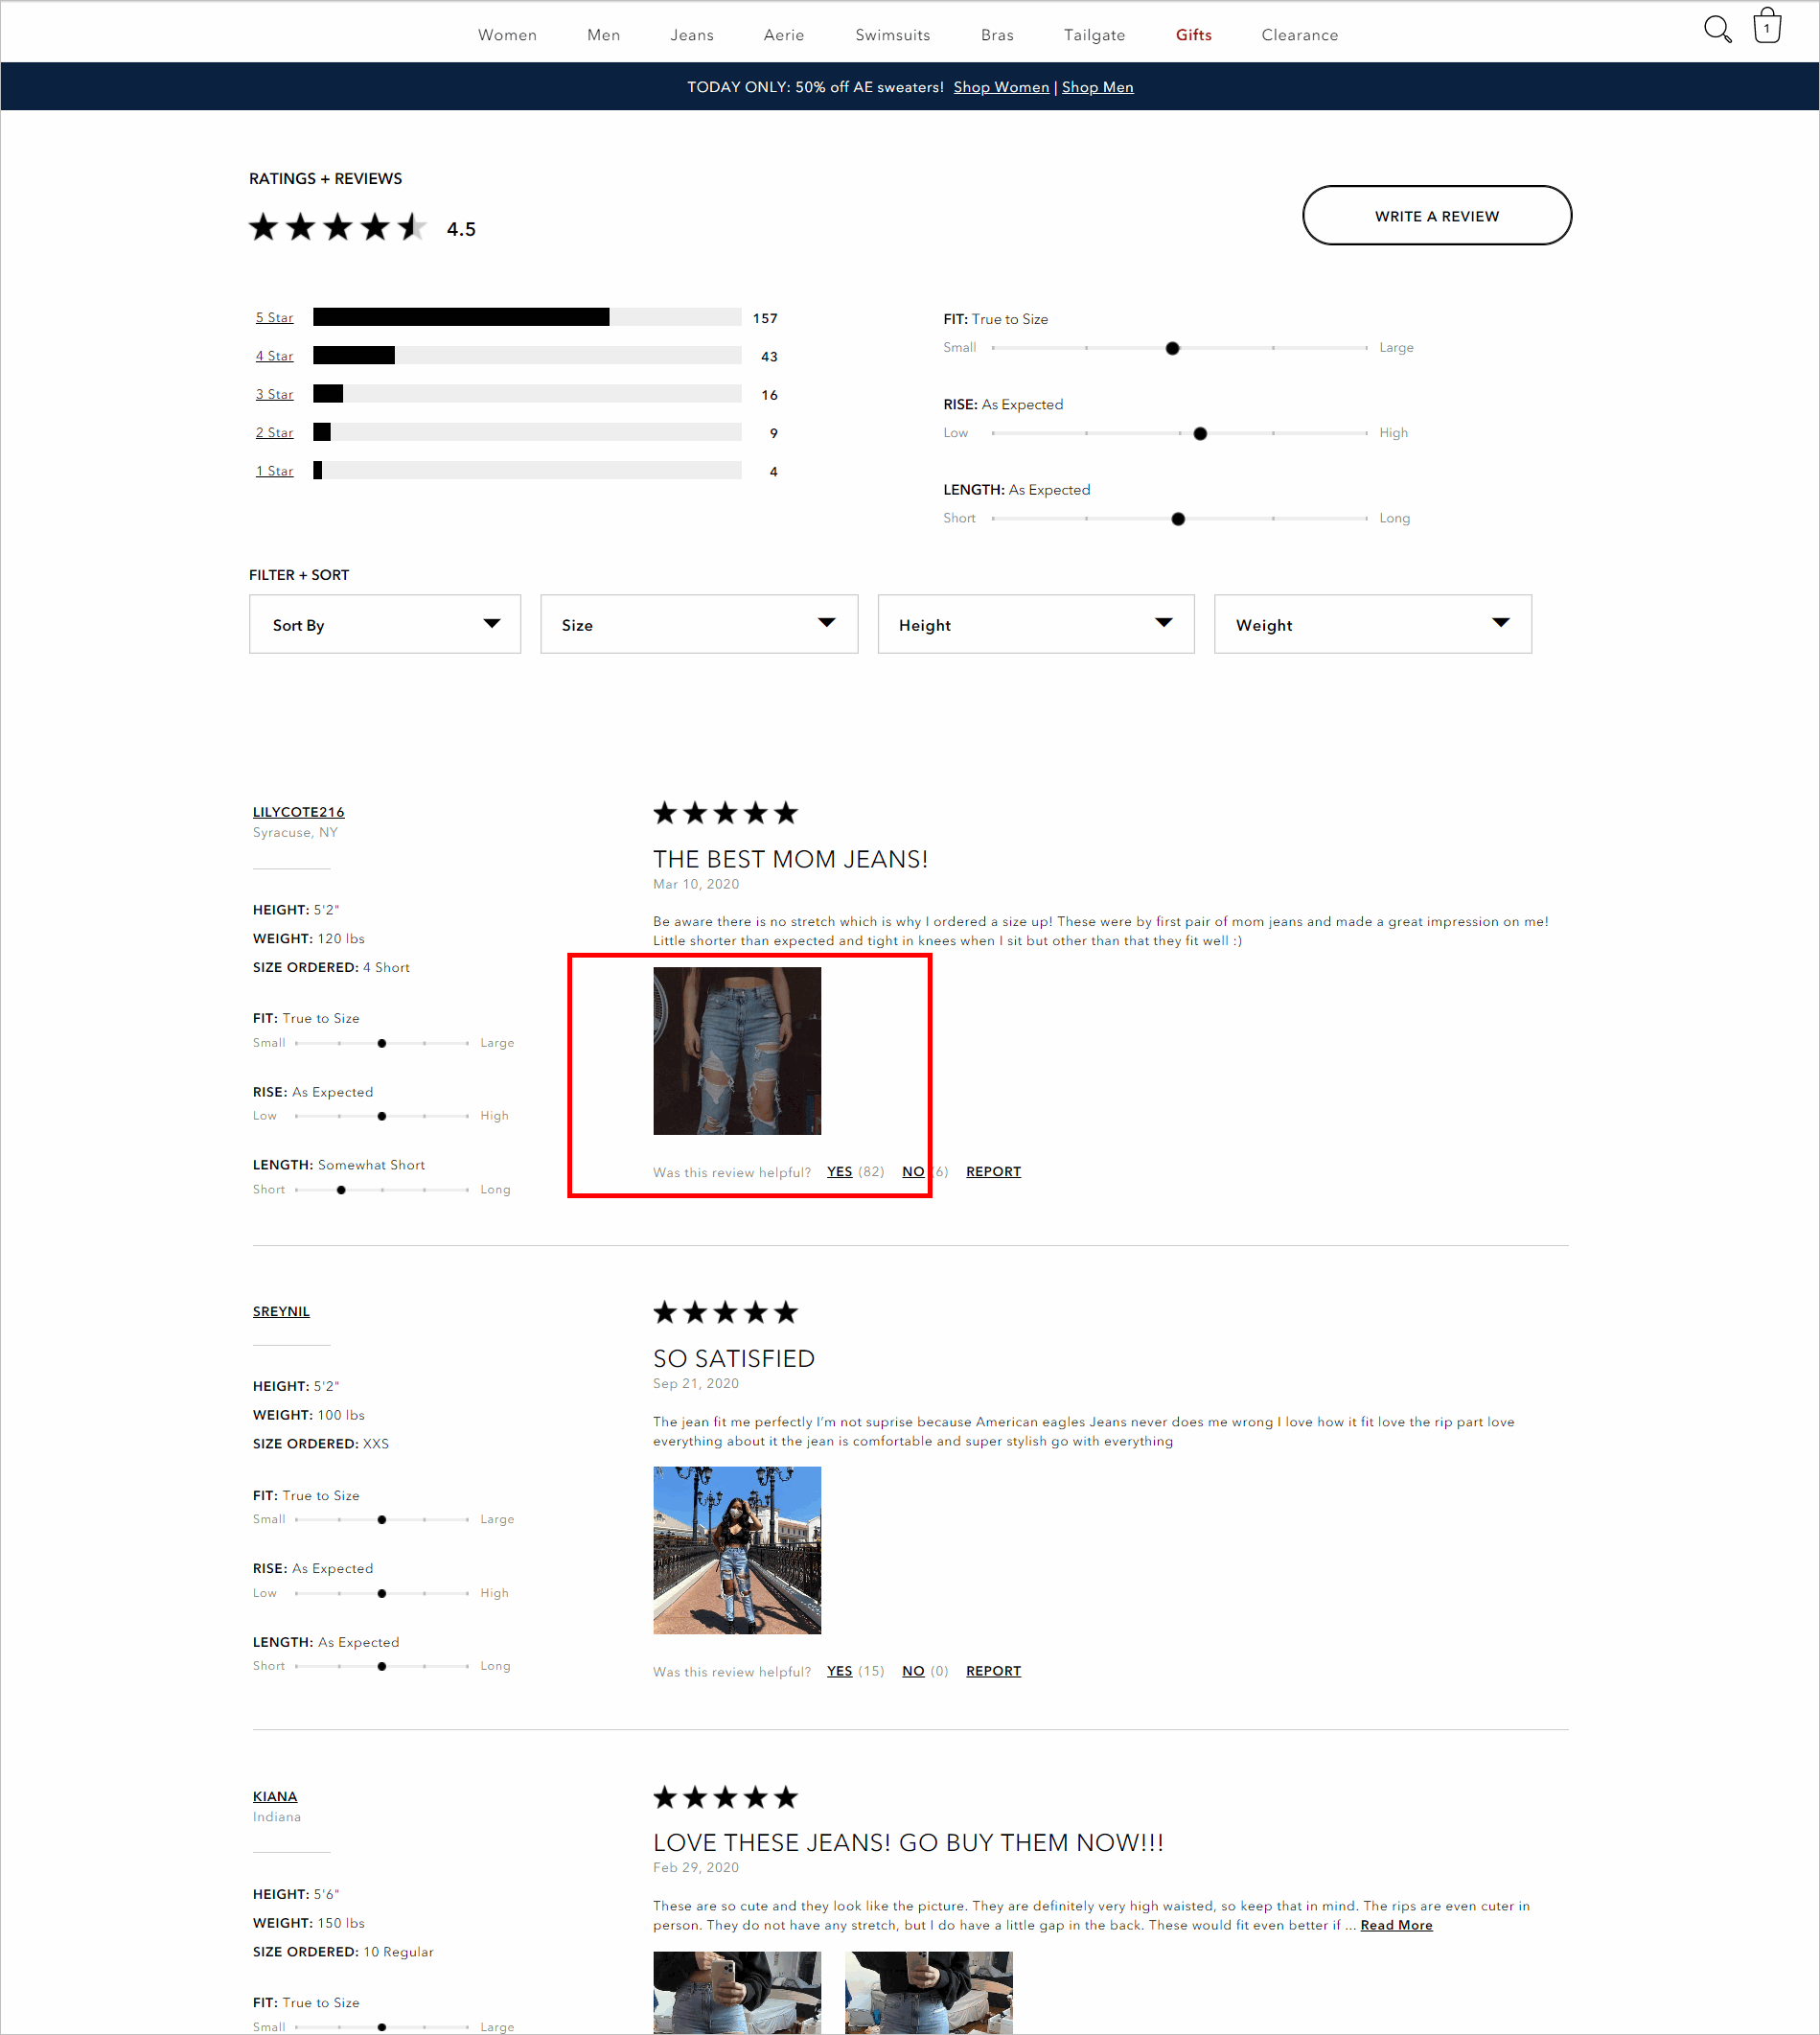  Reviews section with dropdowns for filtering and sorting. It allows users to filter reviews based on size, height, and weight.